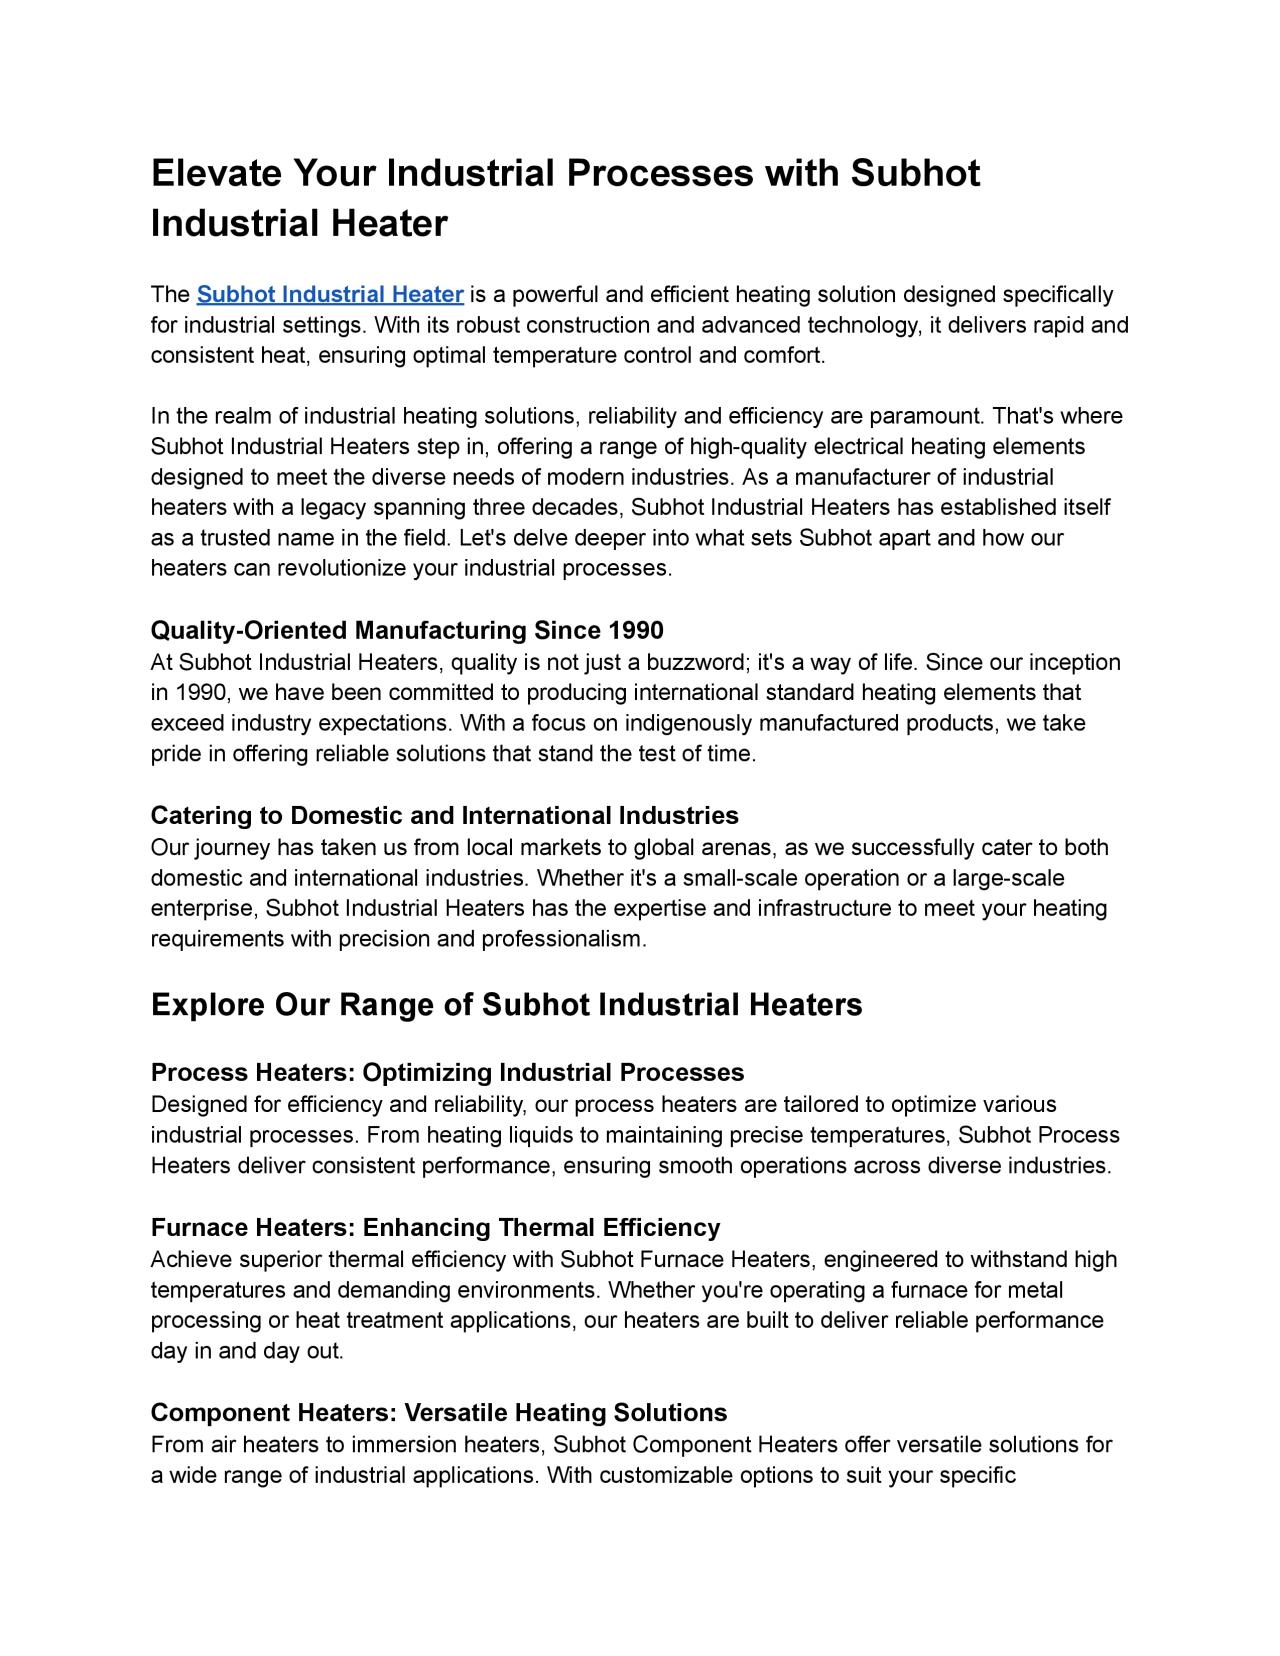 Elevate Your Industrial Processes with Subhot Industrial Heater